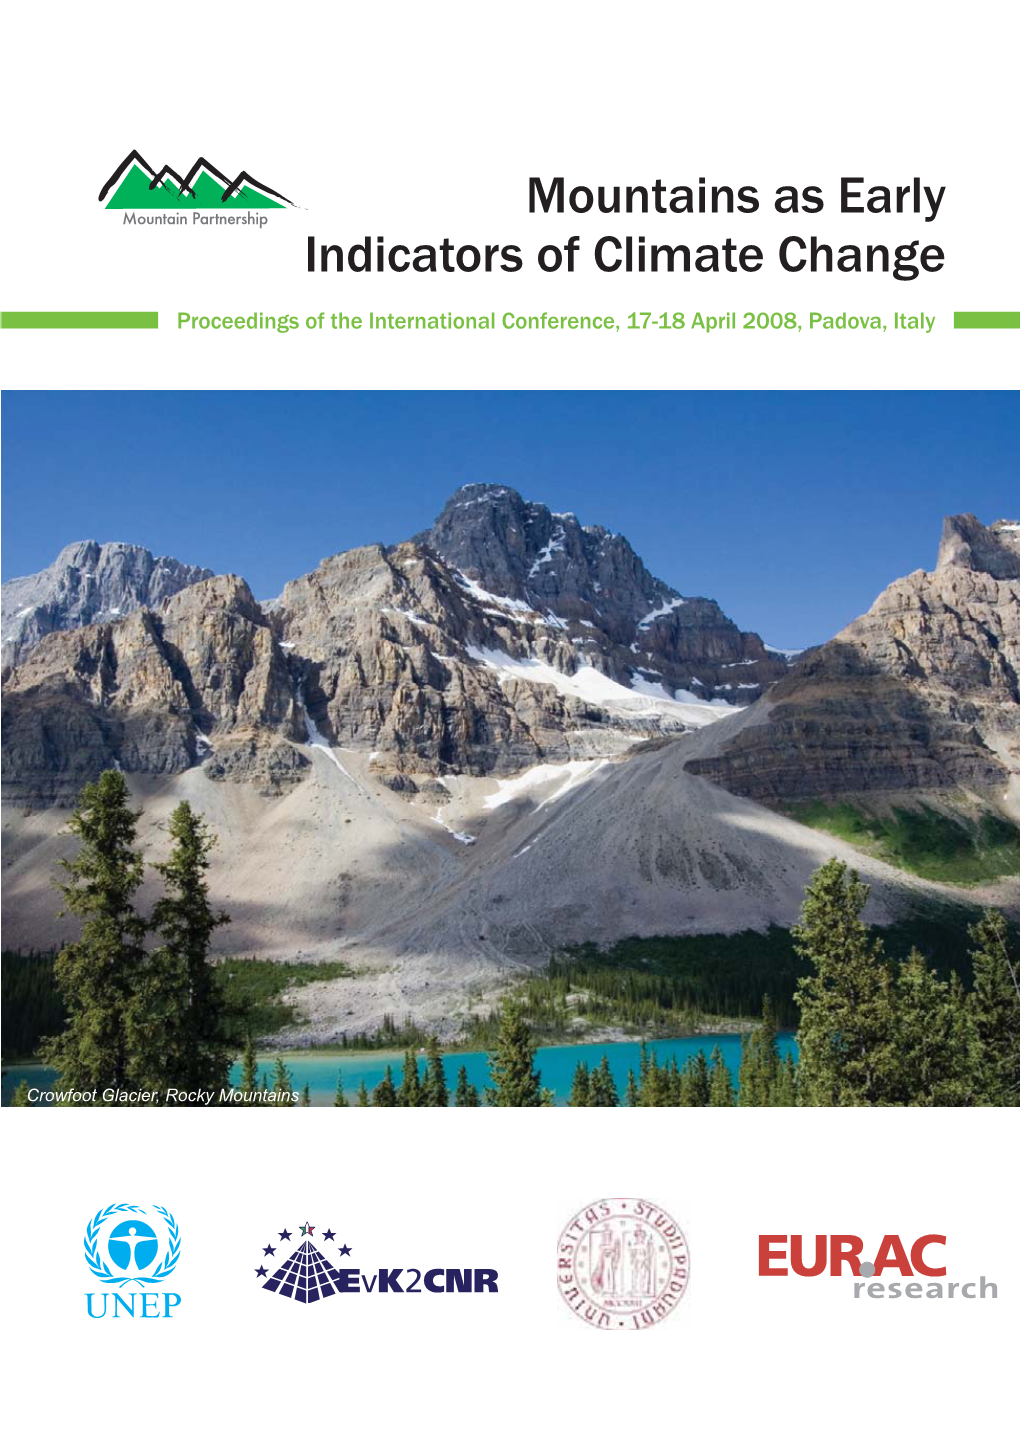 ICCCM-Txt 20090510.Indd 132 03.06.2009 17:09:23 Proceedings of the International Conference on Mountains As Early Indicators of Climate Change